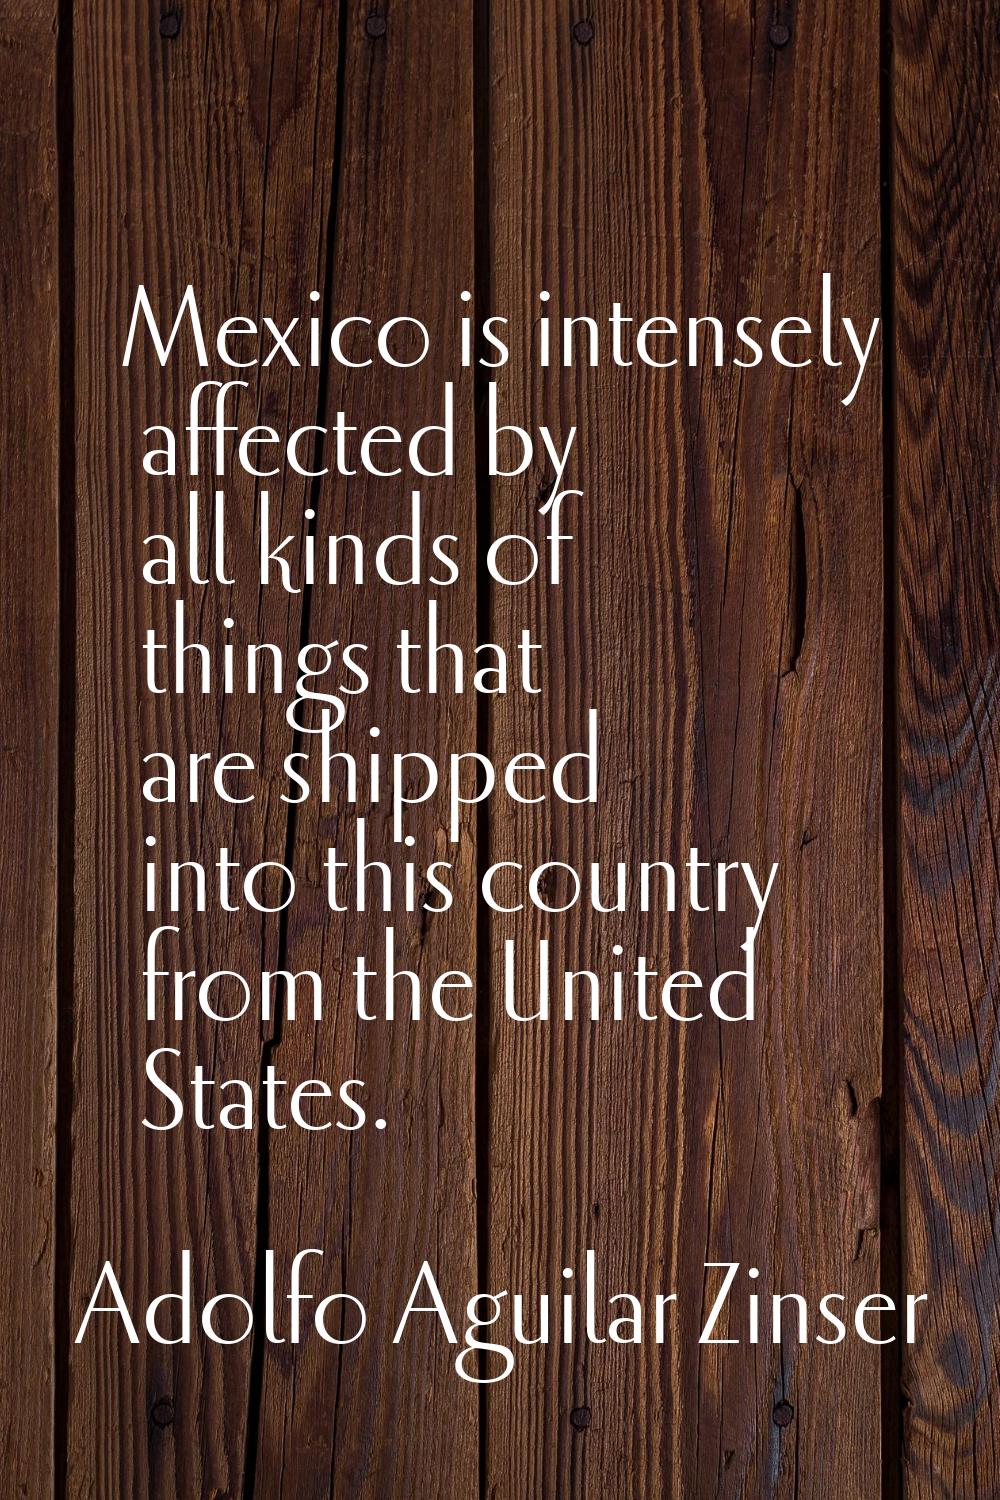 Mexico is intensely affected by all kinds of things that are shipped into this country from the Uni